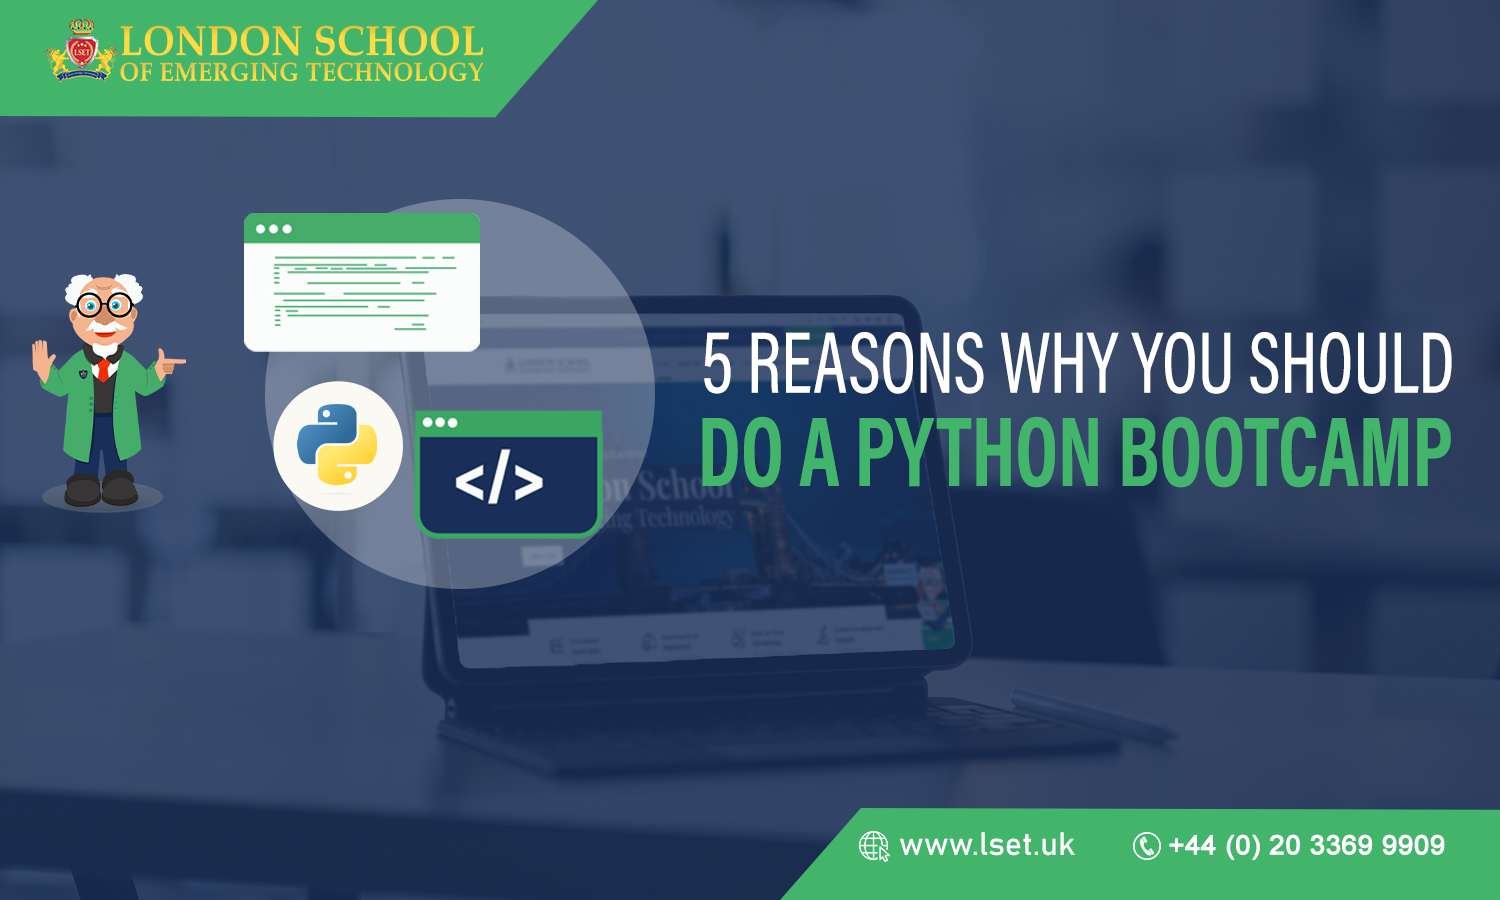 5 Reasons Why You Should Do a Python Bootcamp